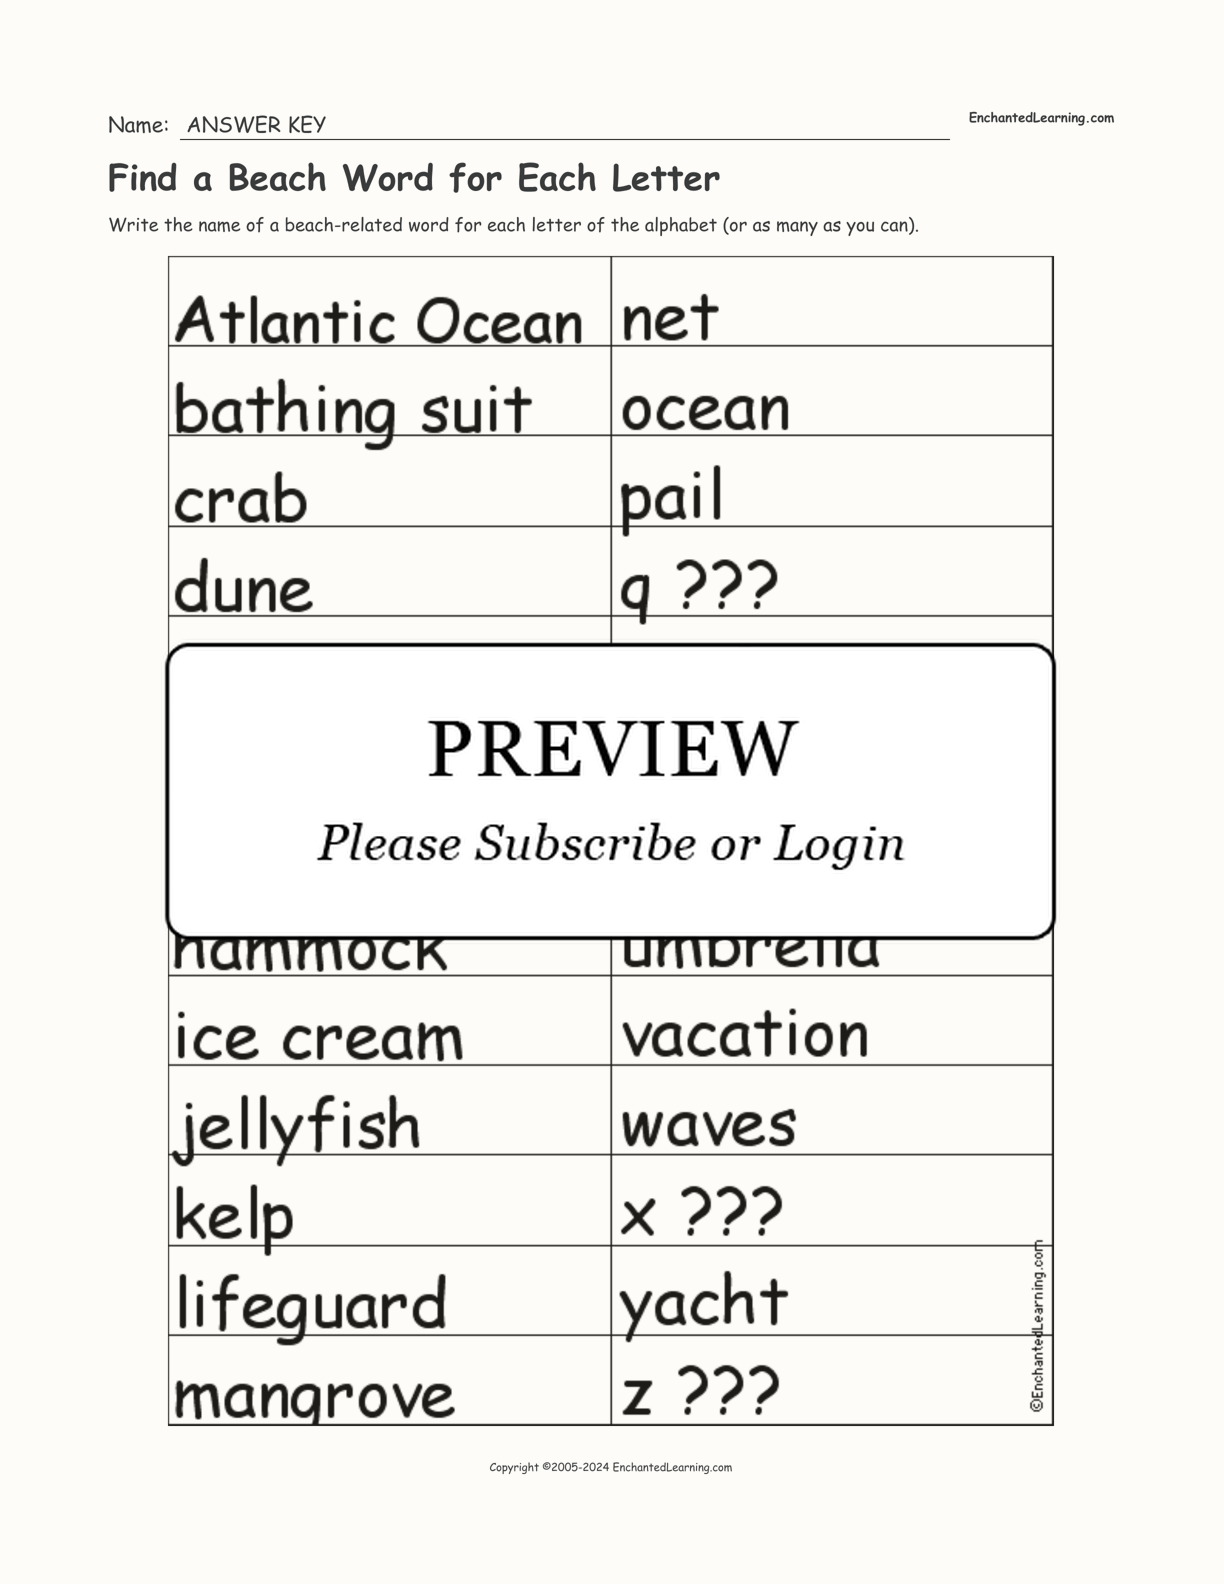 Find a Beach Word for Each Letter interactive worksheet page 2